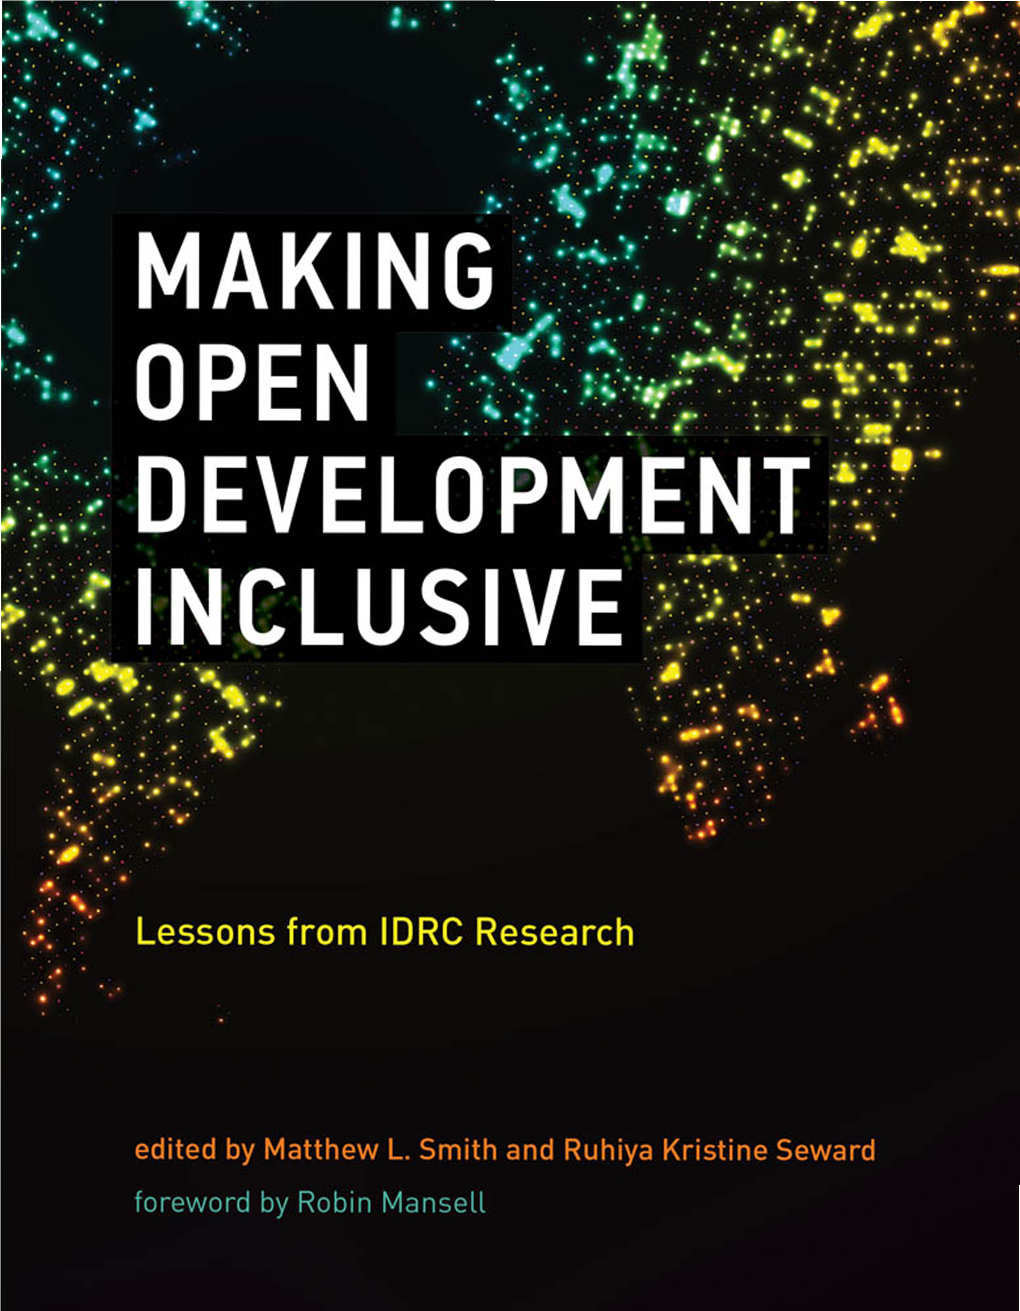 Making Open Development Inclusive: Lessons from IDRC Research, Edited by Matthew L